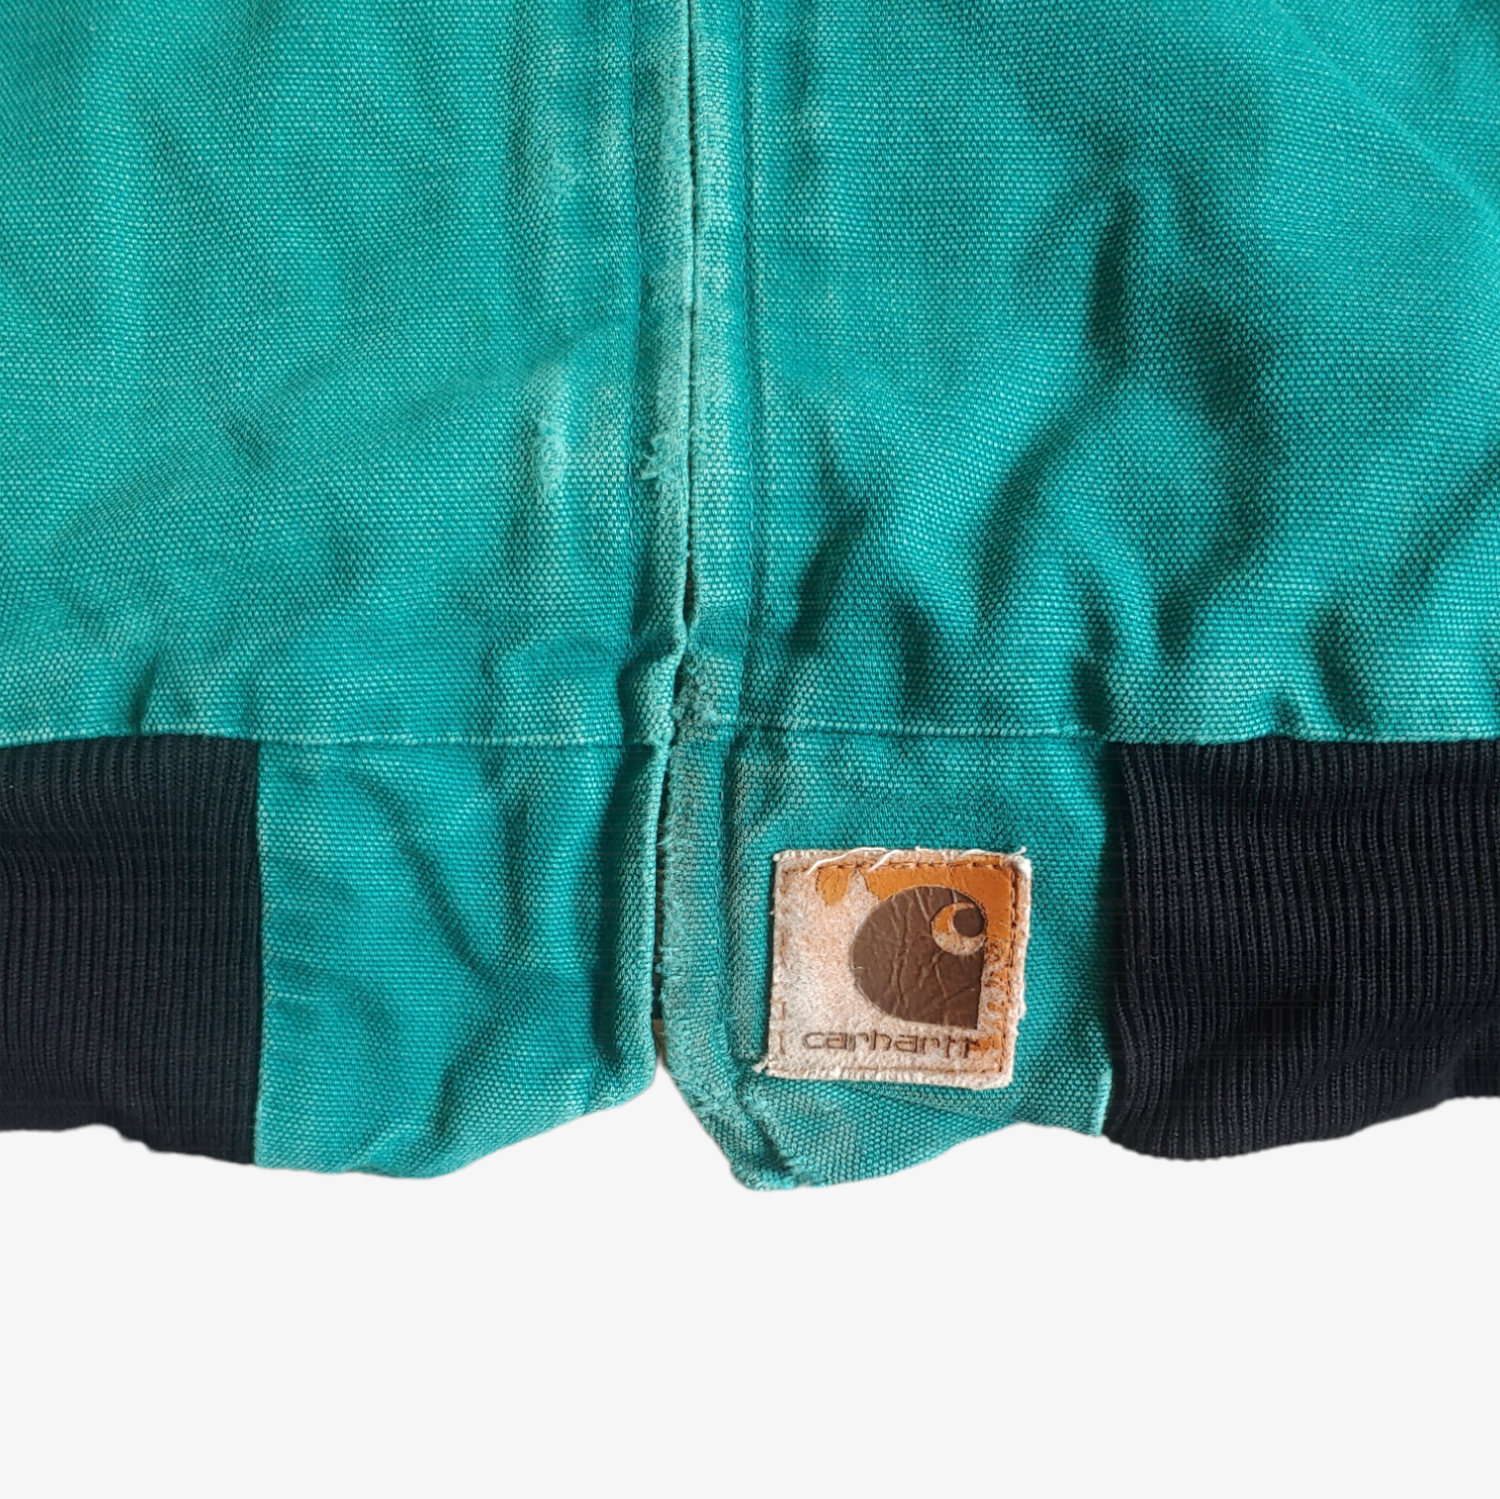 Vintage 90s Carhartt Aztec Navajo Patterned Turquoise Workwear Jacket Tag - Casspios Dream